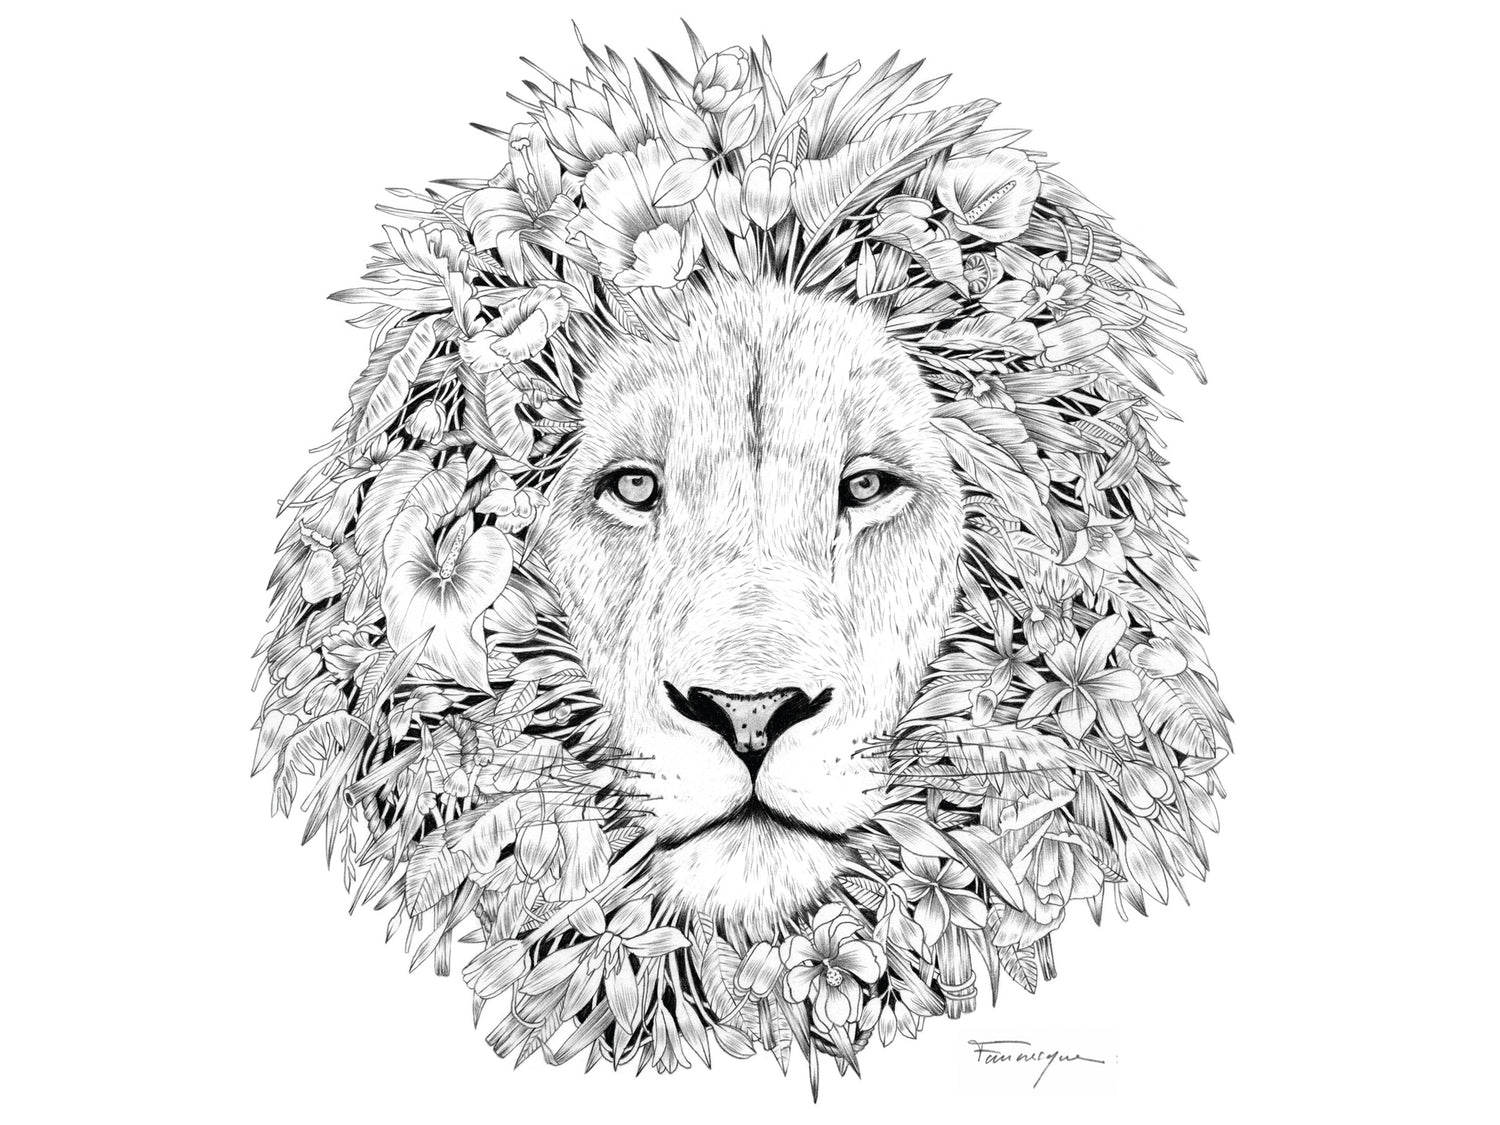 Lion image designed by artist Faunesque for The Paper Rain Project fair trade, organic t-shirts.